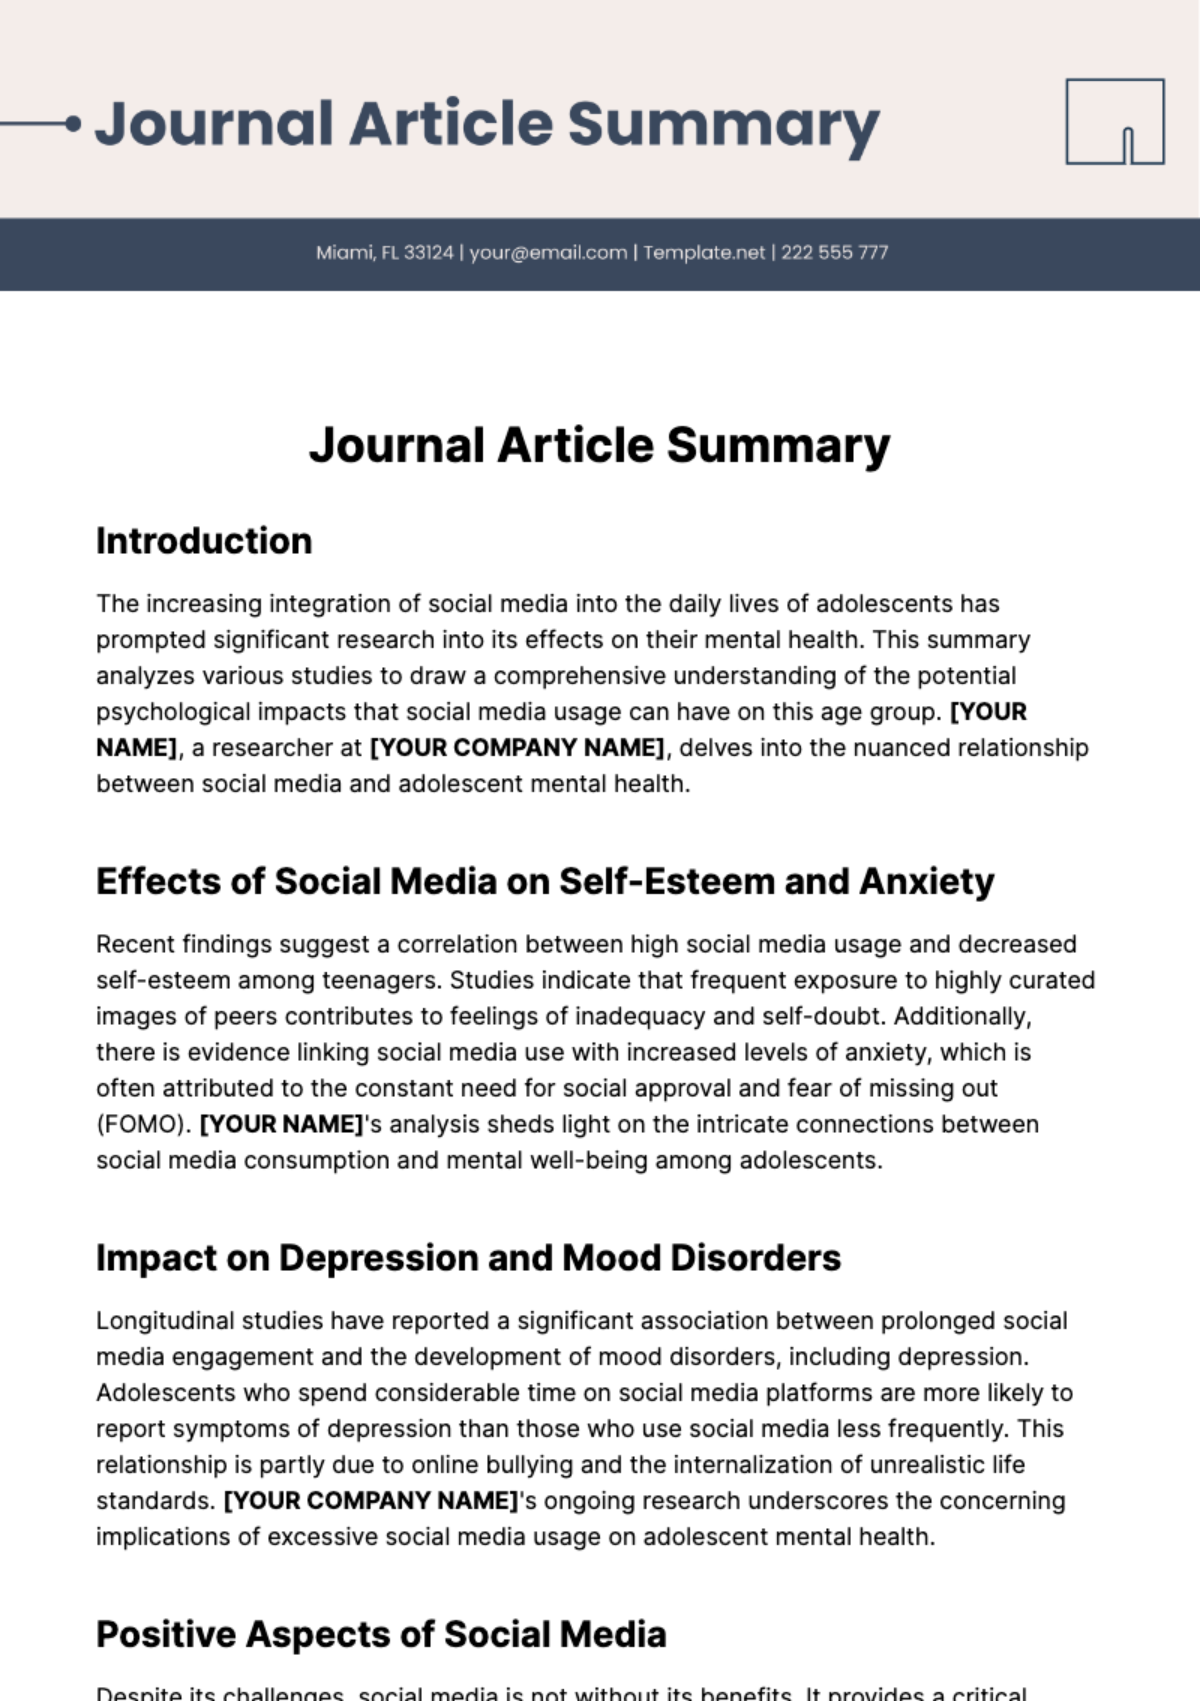 Journal Article Summary Template